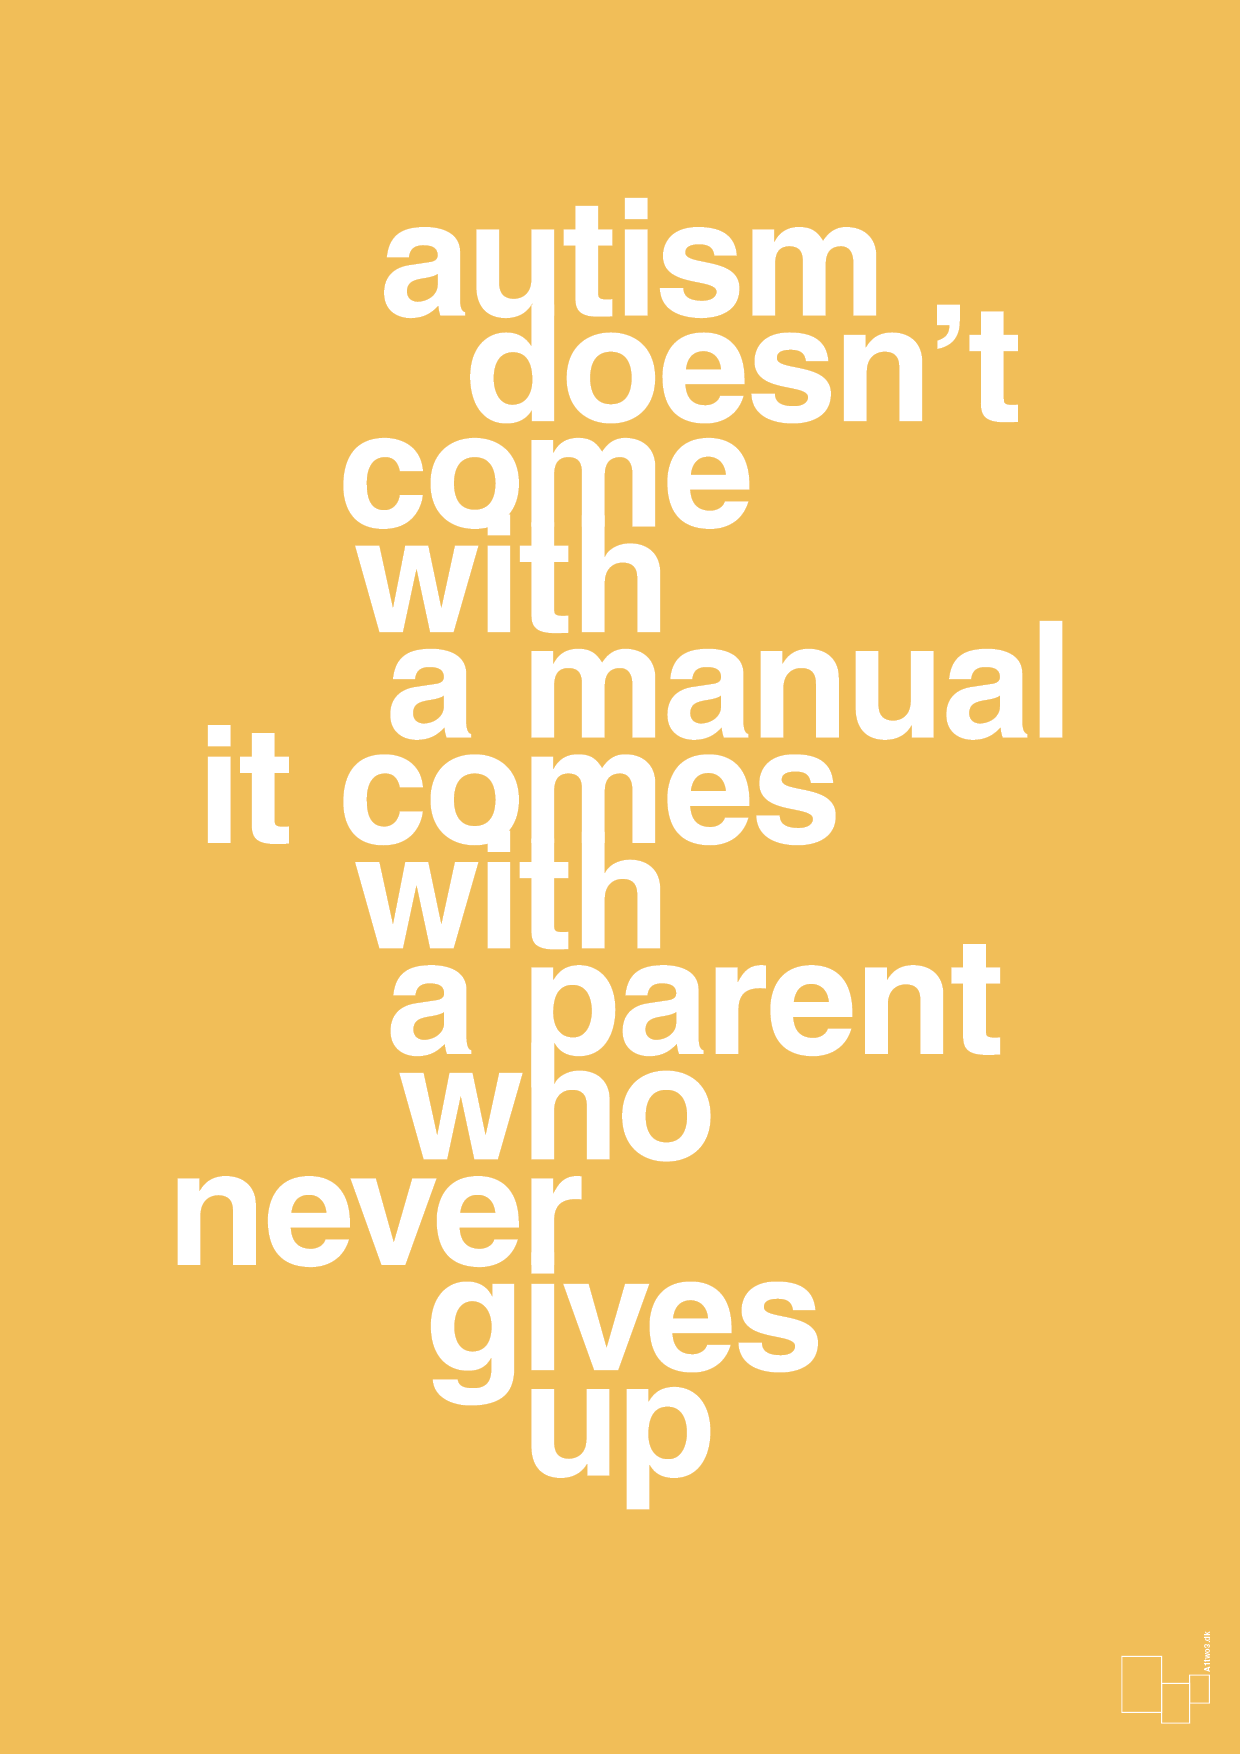 autism doesnt come with a manual it comes with a parent who never gives up - Plakat med Samfund i Honeycomb